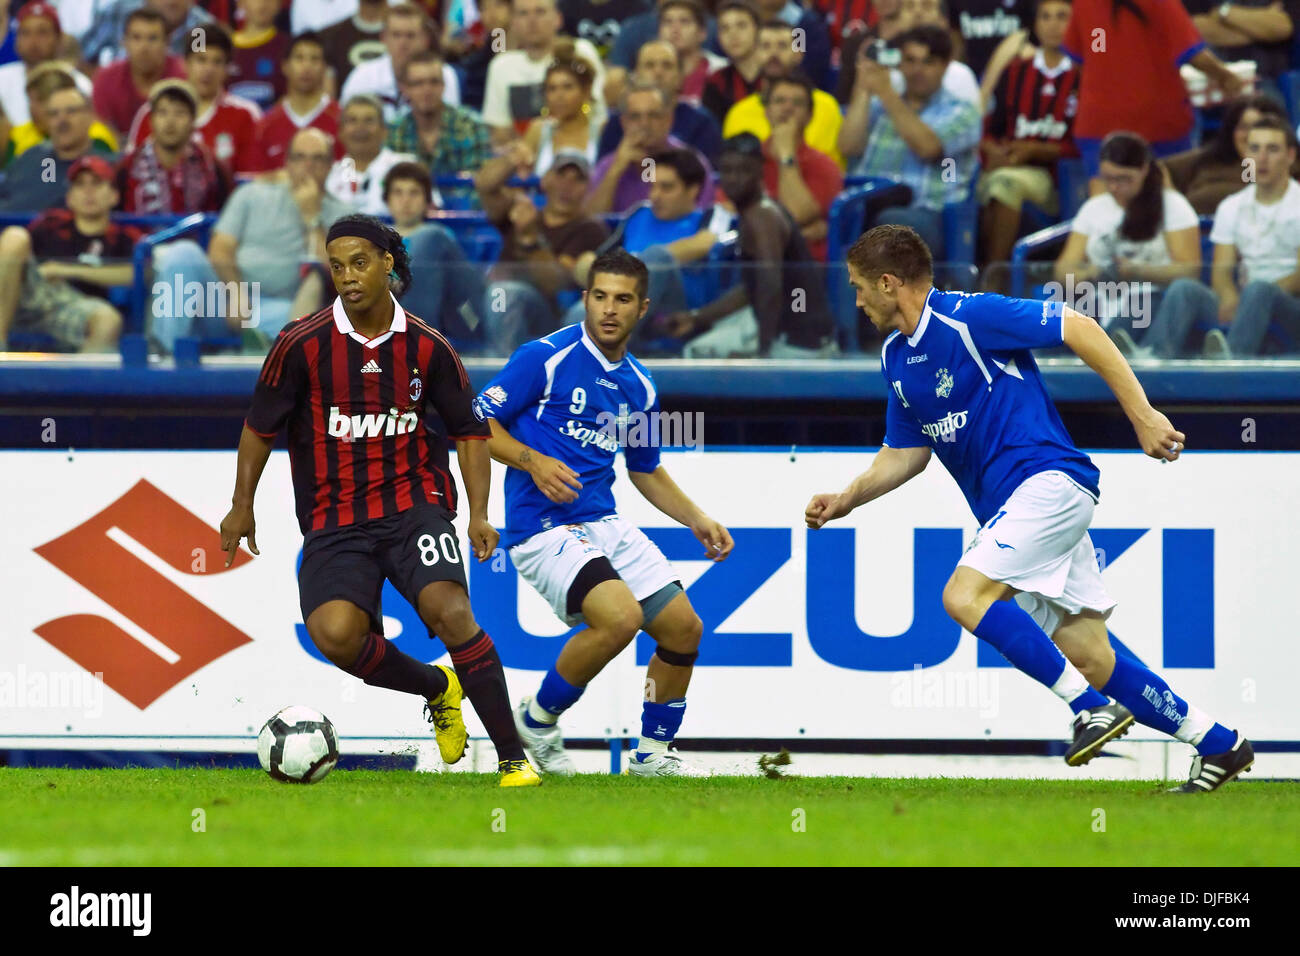 AC Milan's forward Ronaldo (Ronaldinho) De Assis Moreira(#80) in game action during play of the friendly FIFA exhibition game between AC Milan and the Montreal Imapct played at the Olympic Stadium in Montreal, Canada. (Credit Image: © Leon Switzer/Southcreek Global/ZUMApress.com) Stock Photo